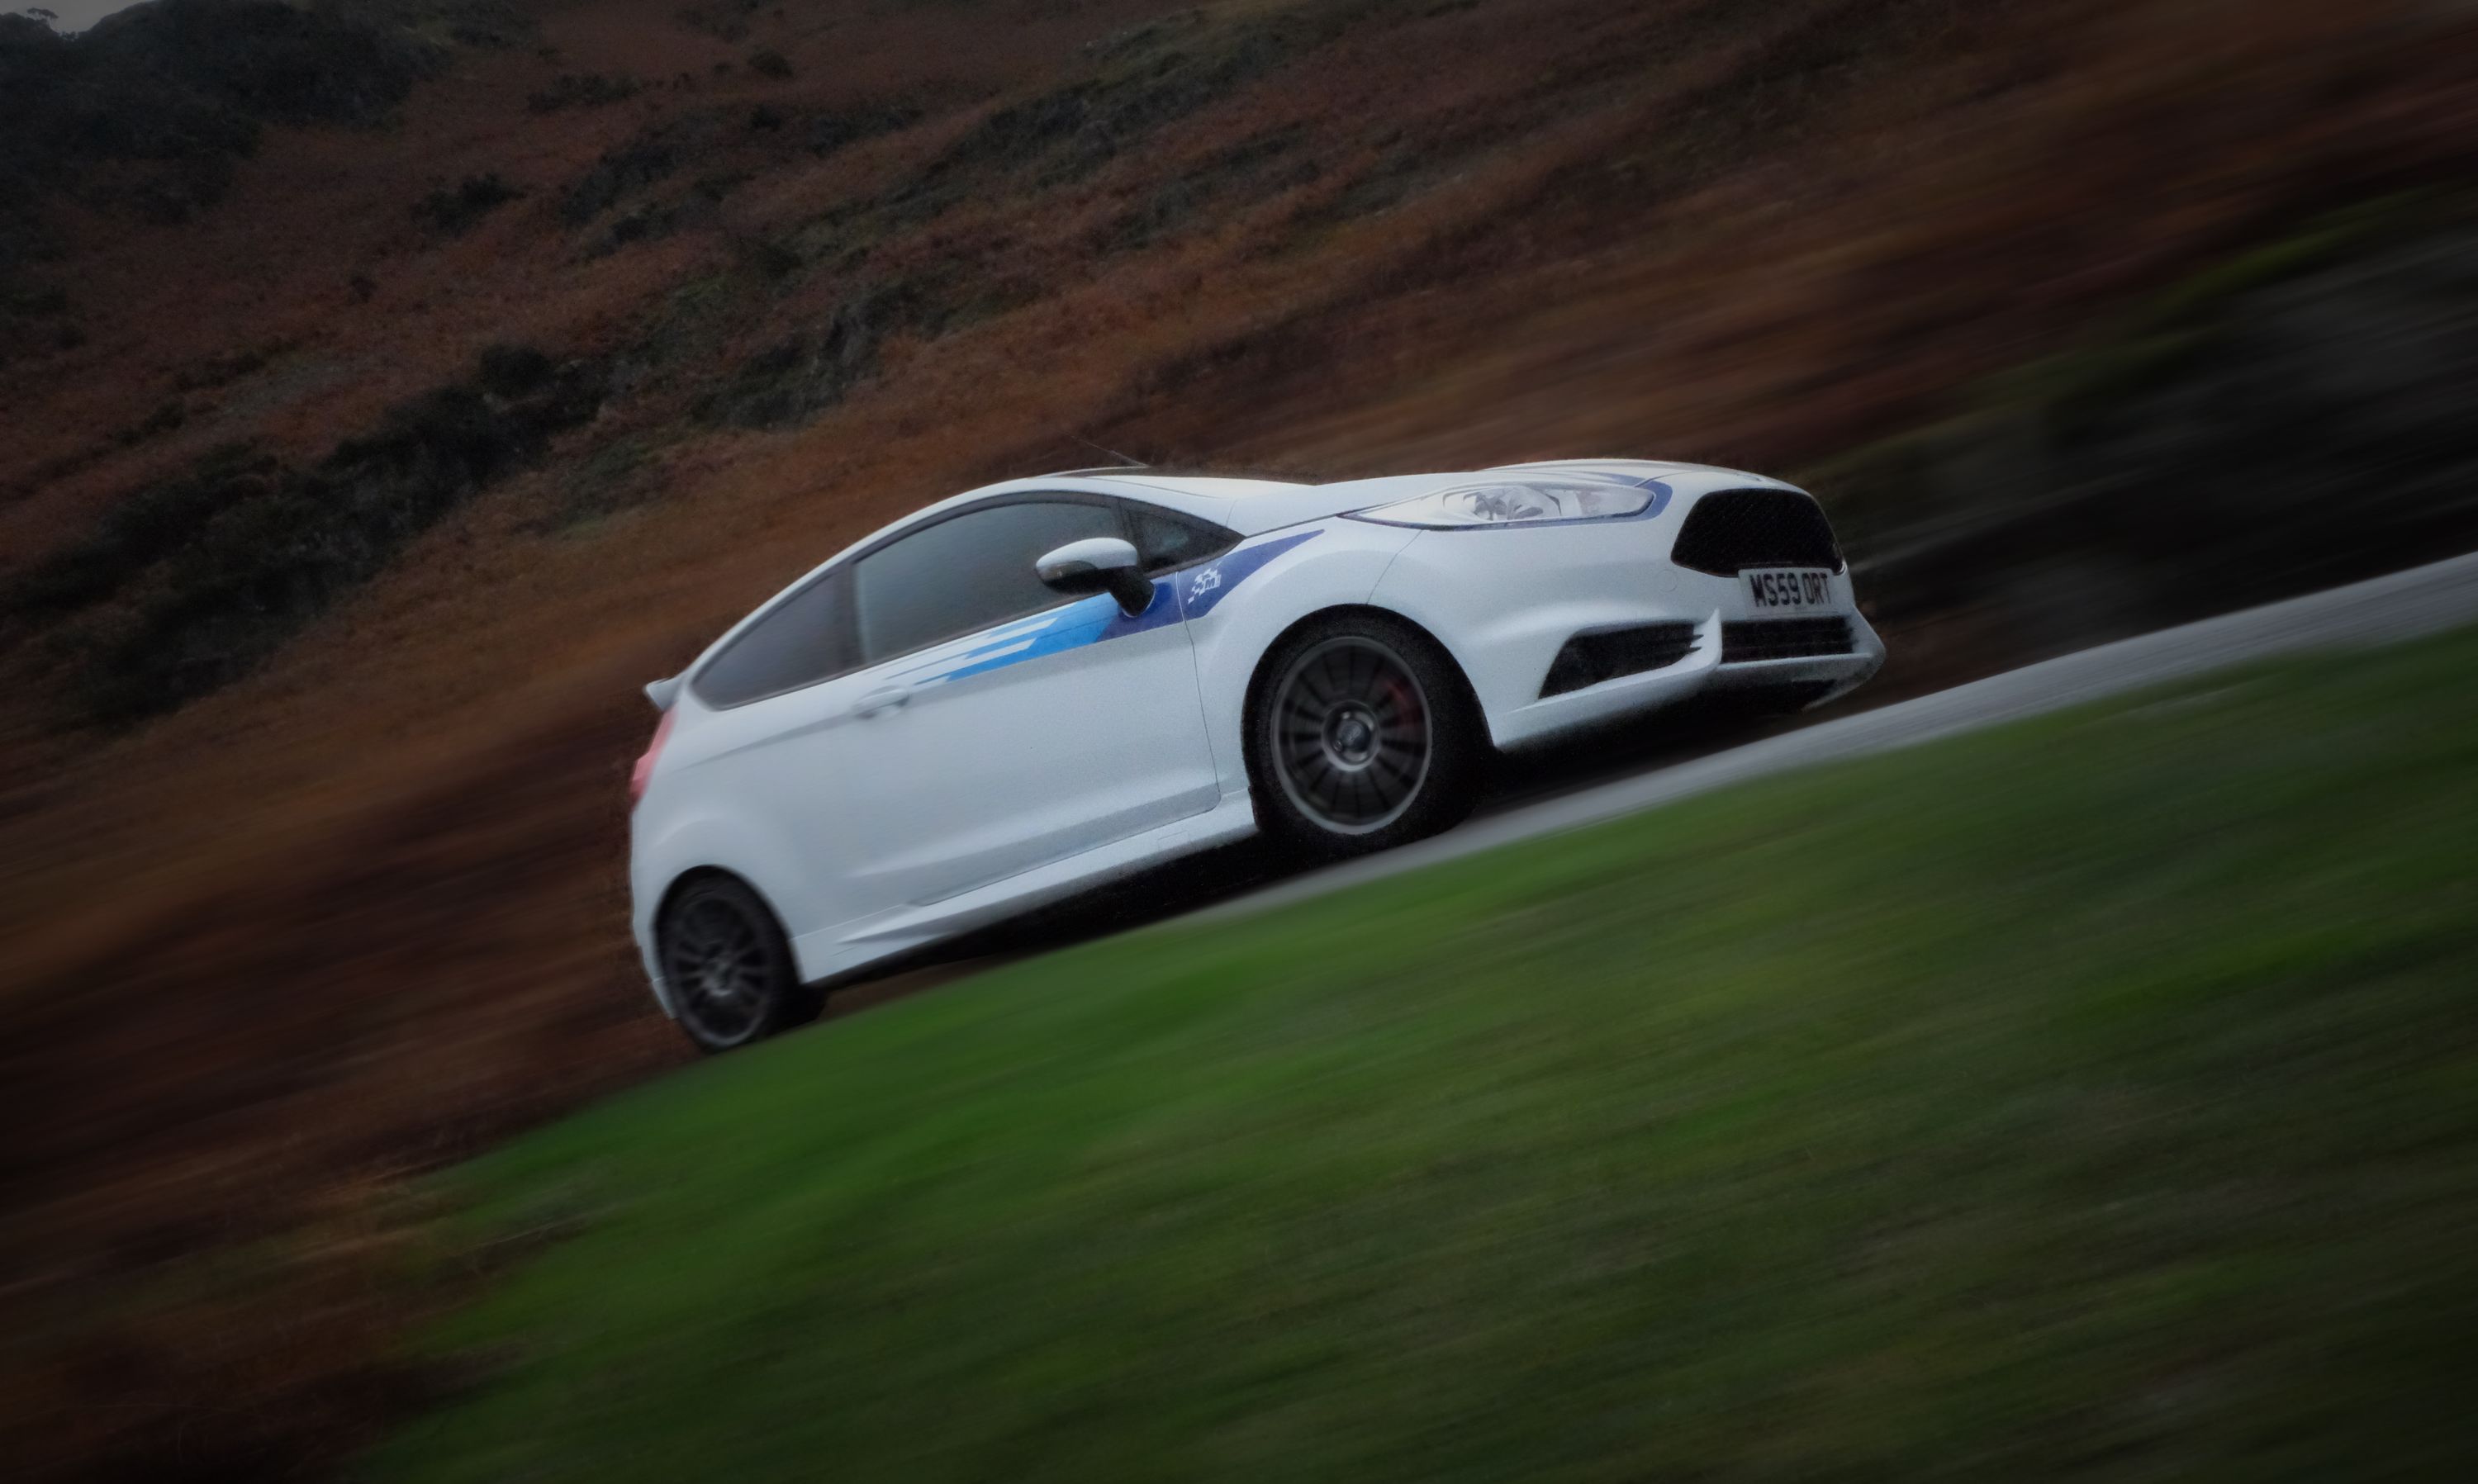 M-SPORT EDITION FORD FIESTA REVEALED